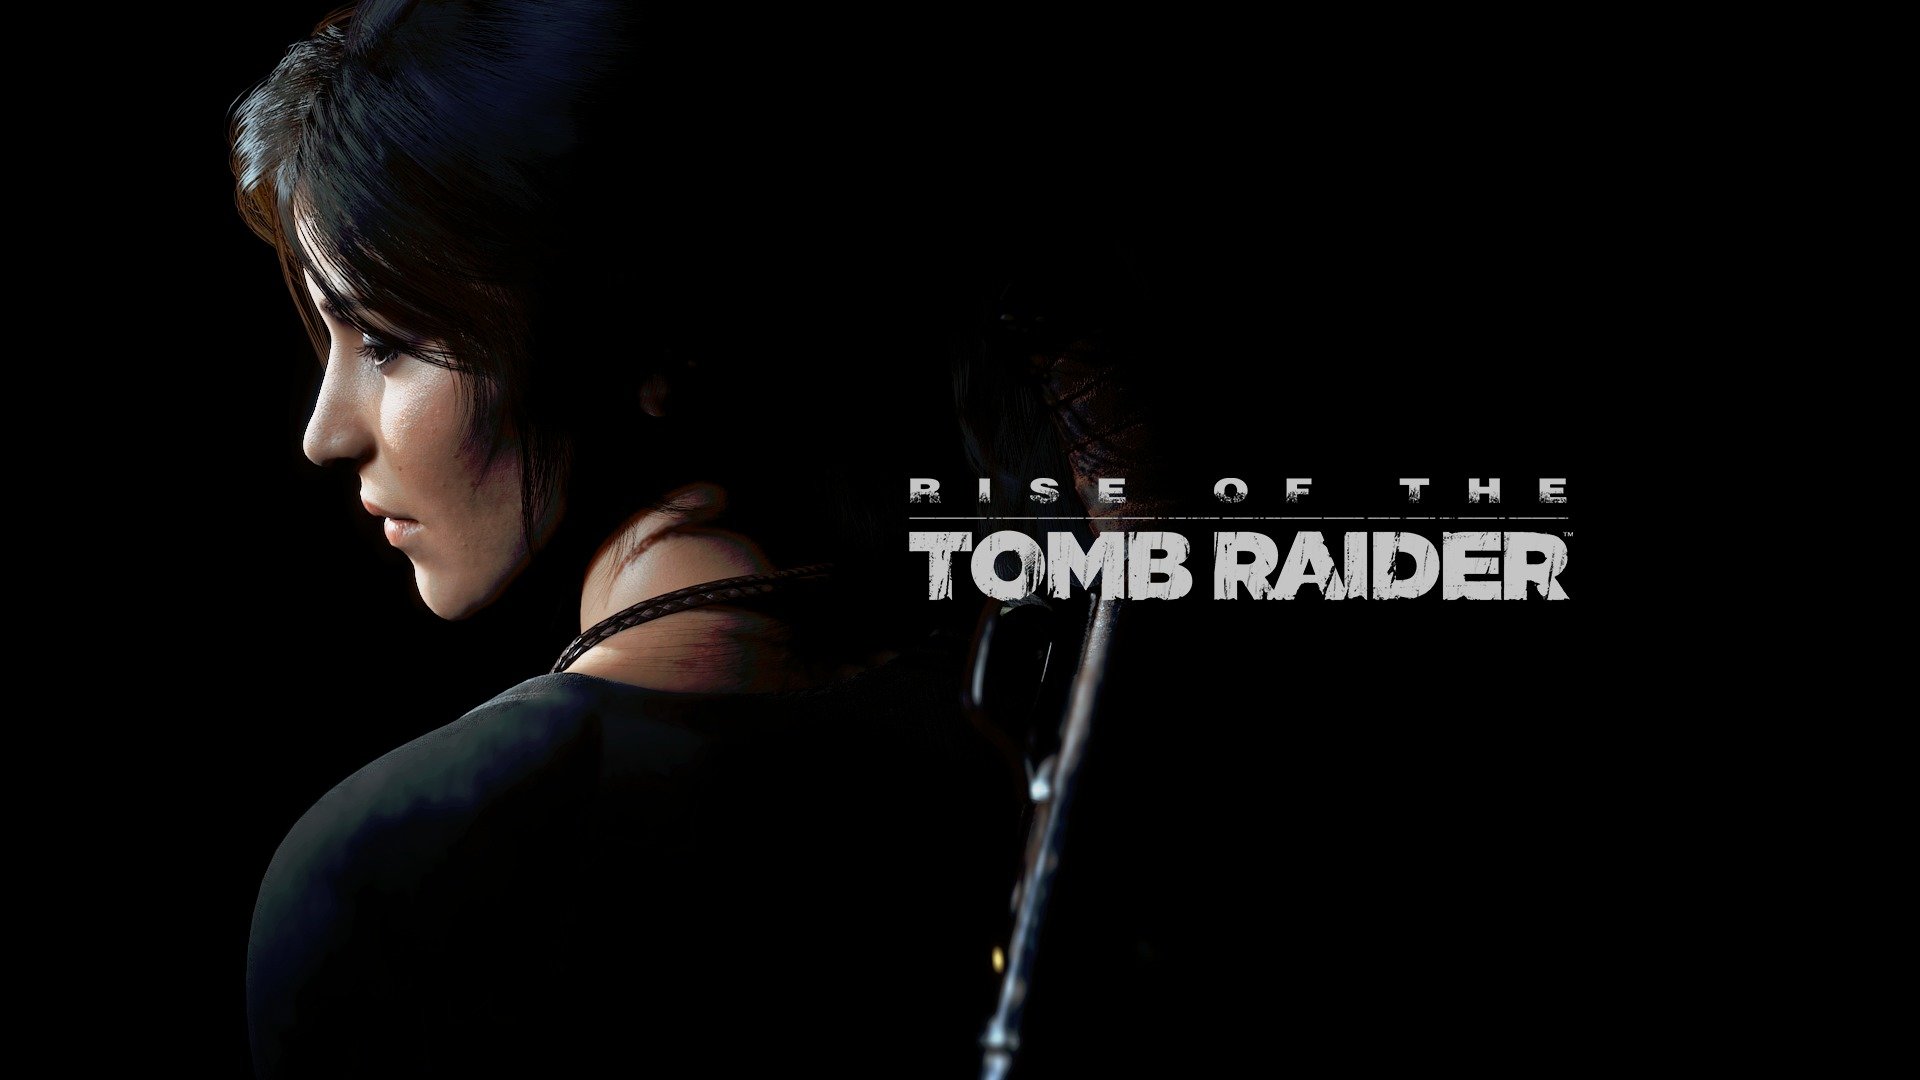 Download hd 1920x1080 Rise Of The Tomb Raider desktop wallpaper ID:83953 for free